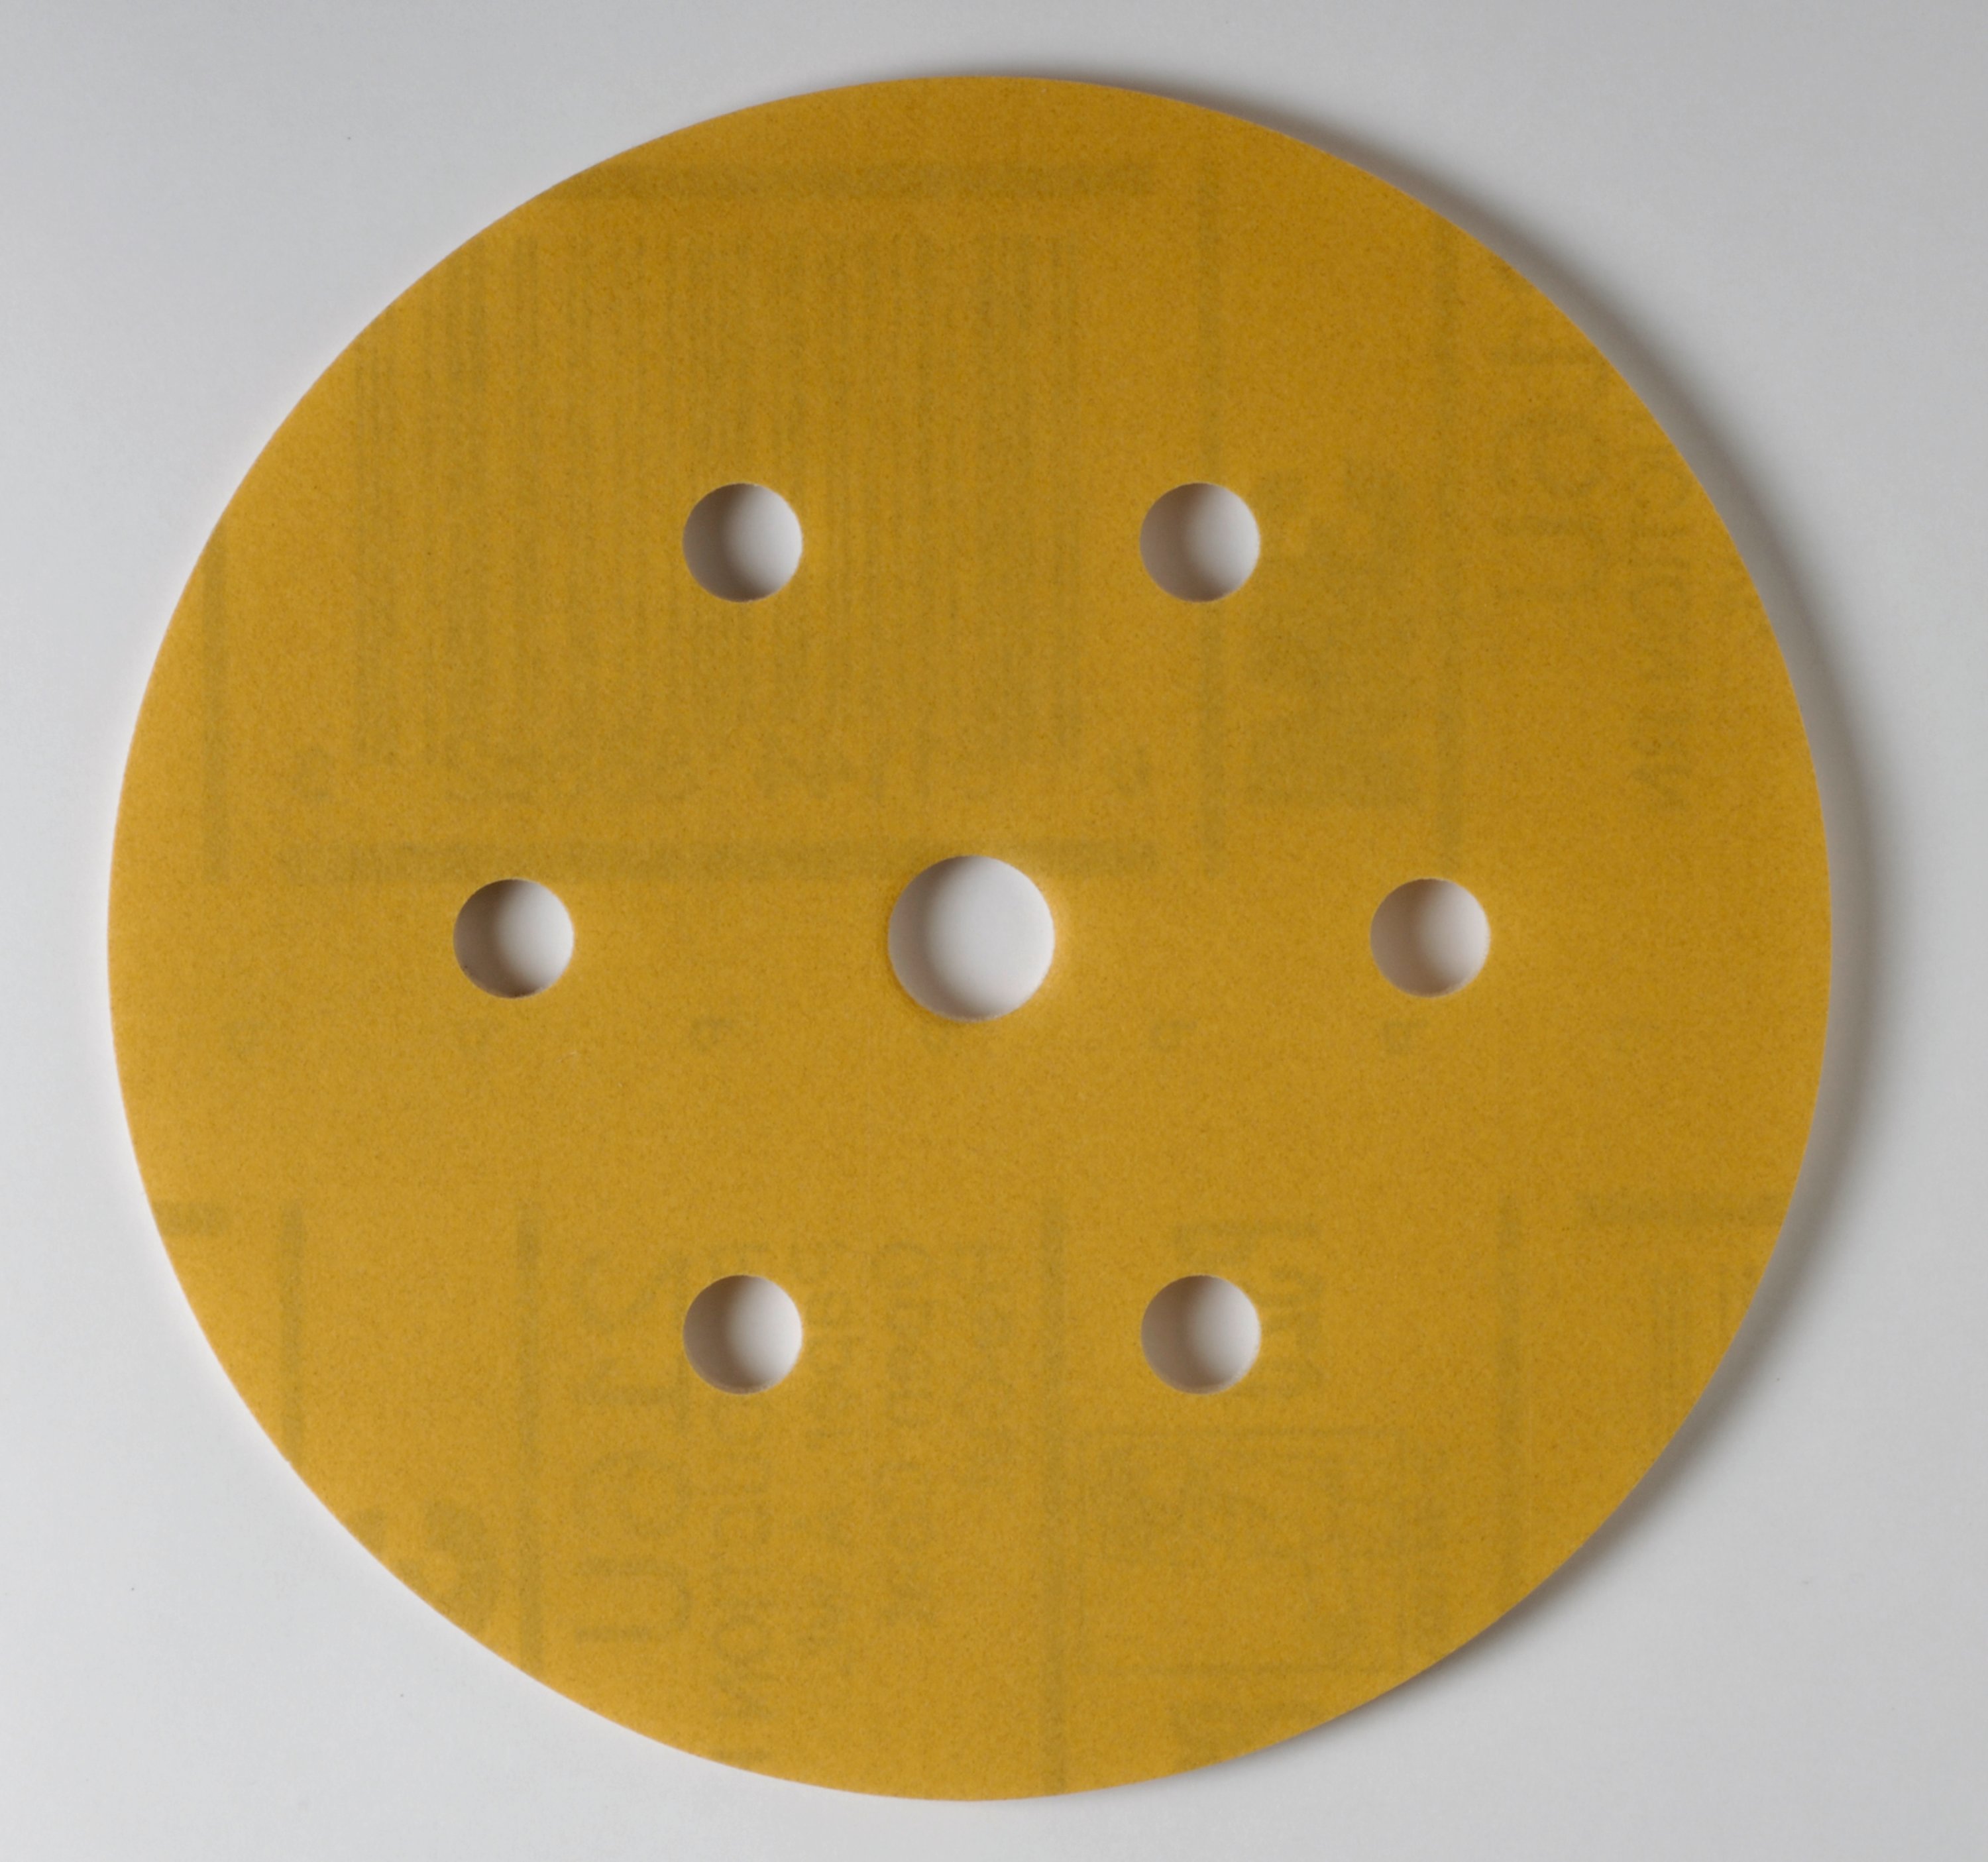 3M™ Stikit™ Gold Film Abrasive Disc Roll 255L is packaged as multiple adhesive-backed discs rolled onto a core.